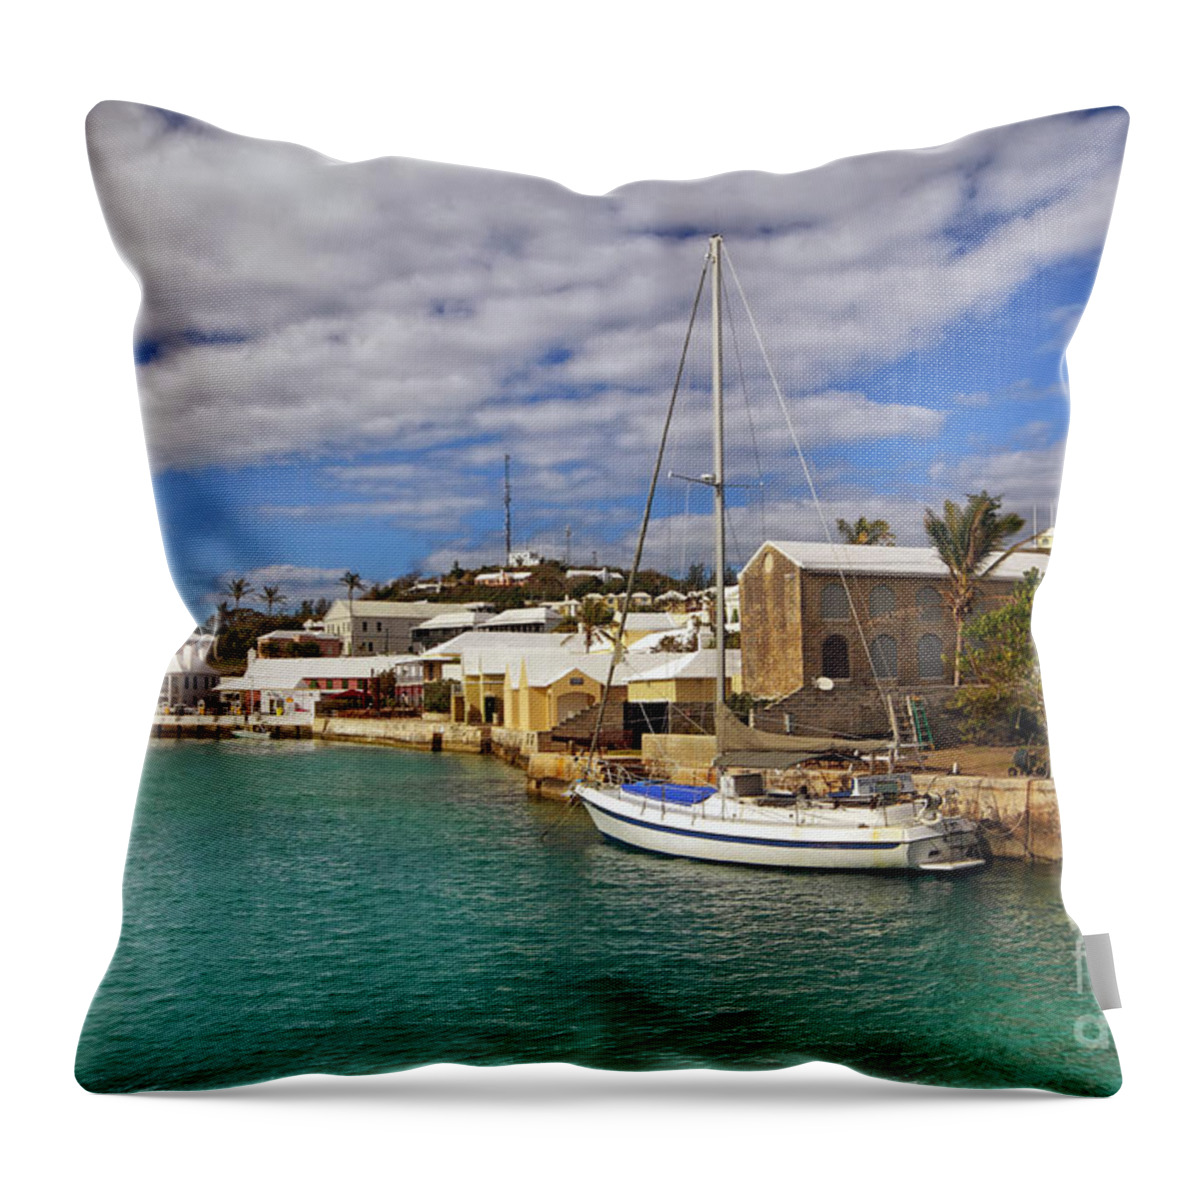 Bermuda Throw Pillow featuring the photograph Bermuda St George Harbour by Charline Xia